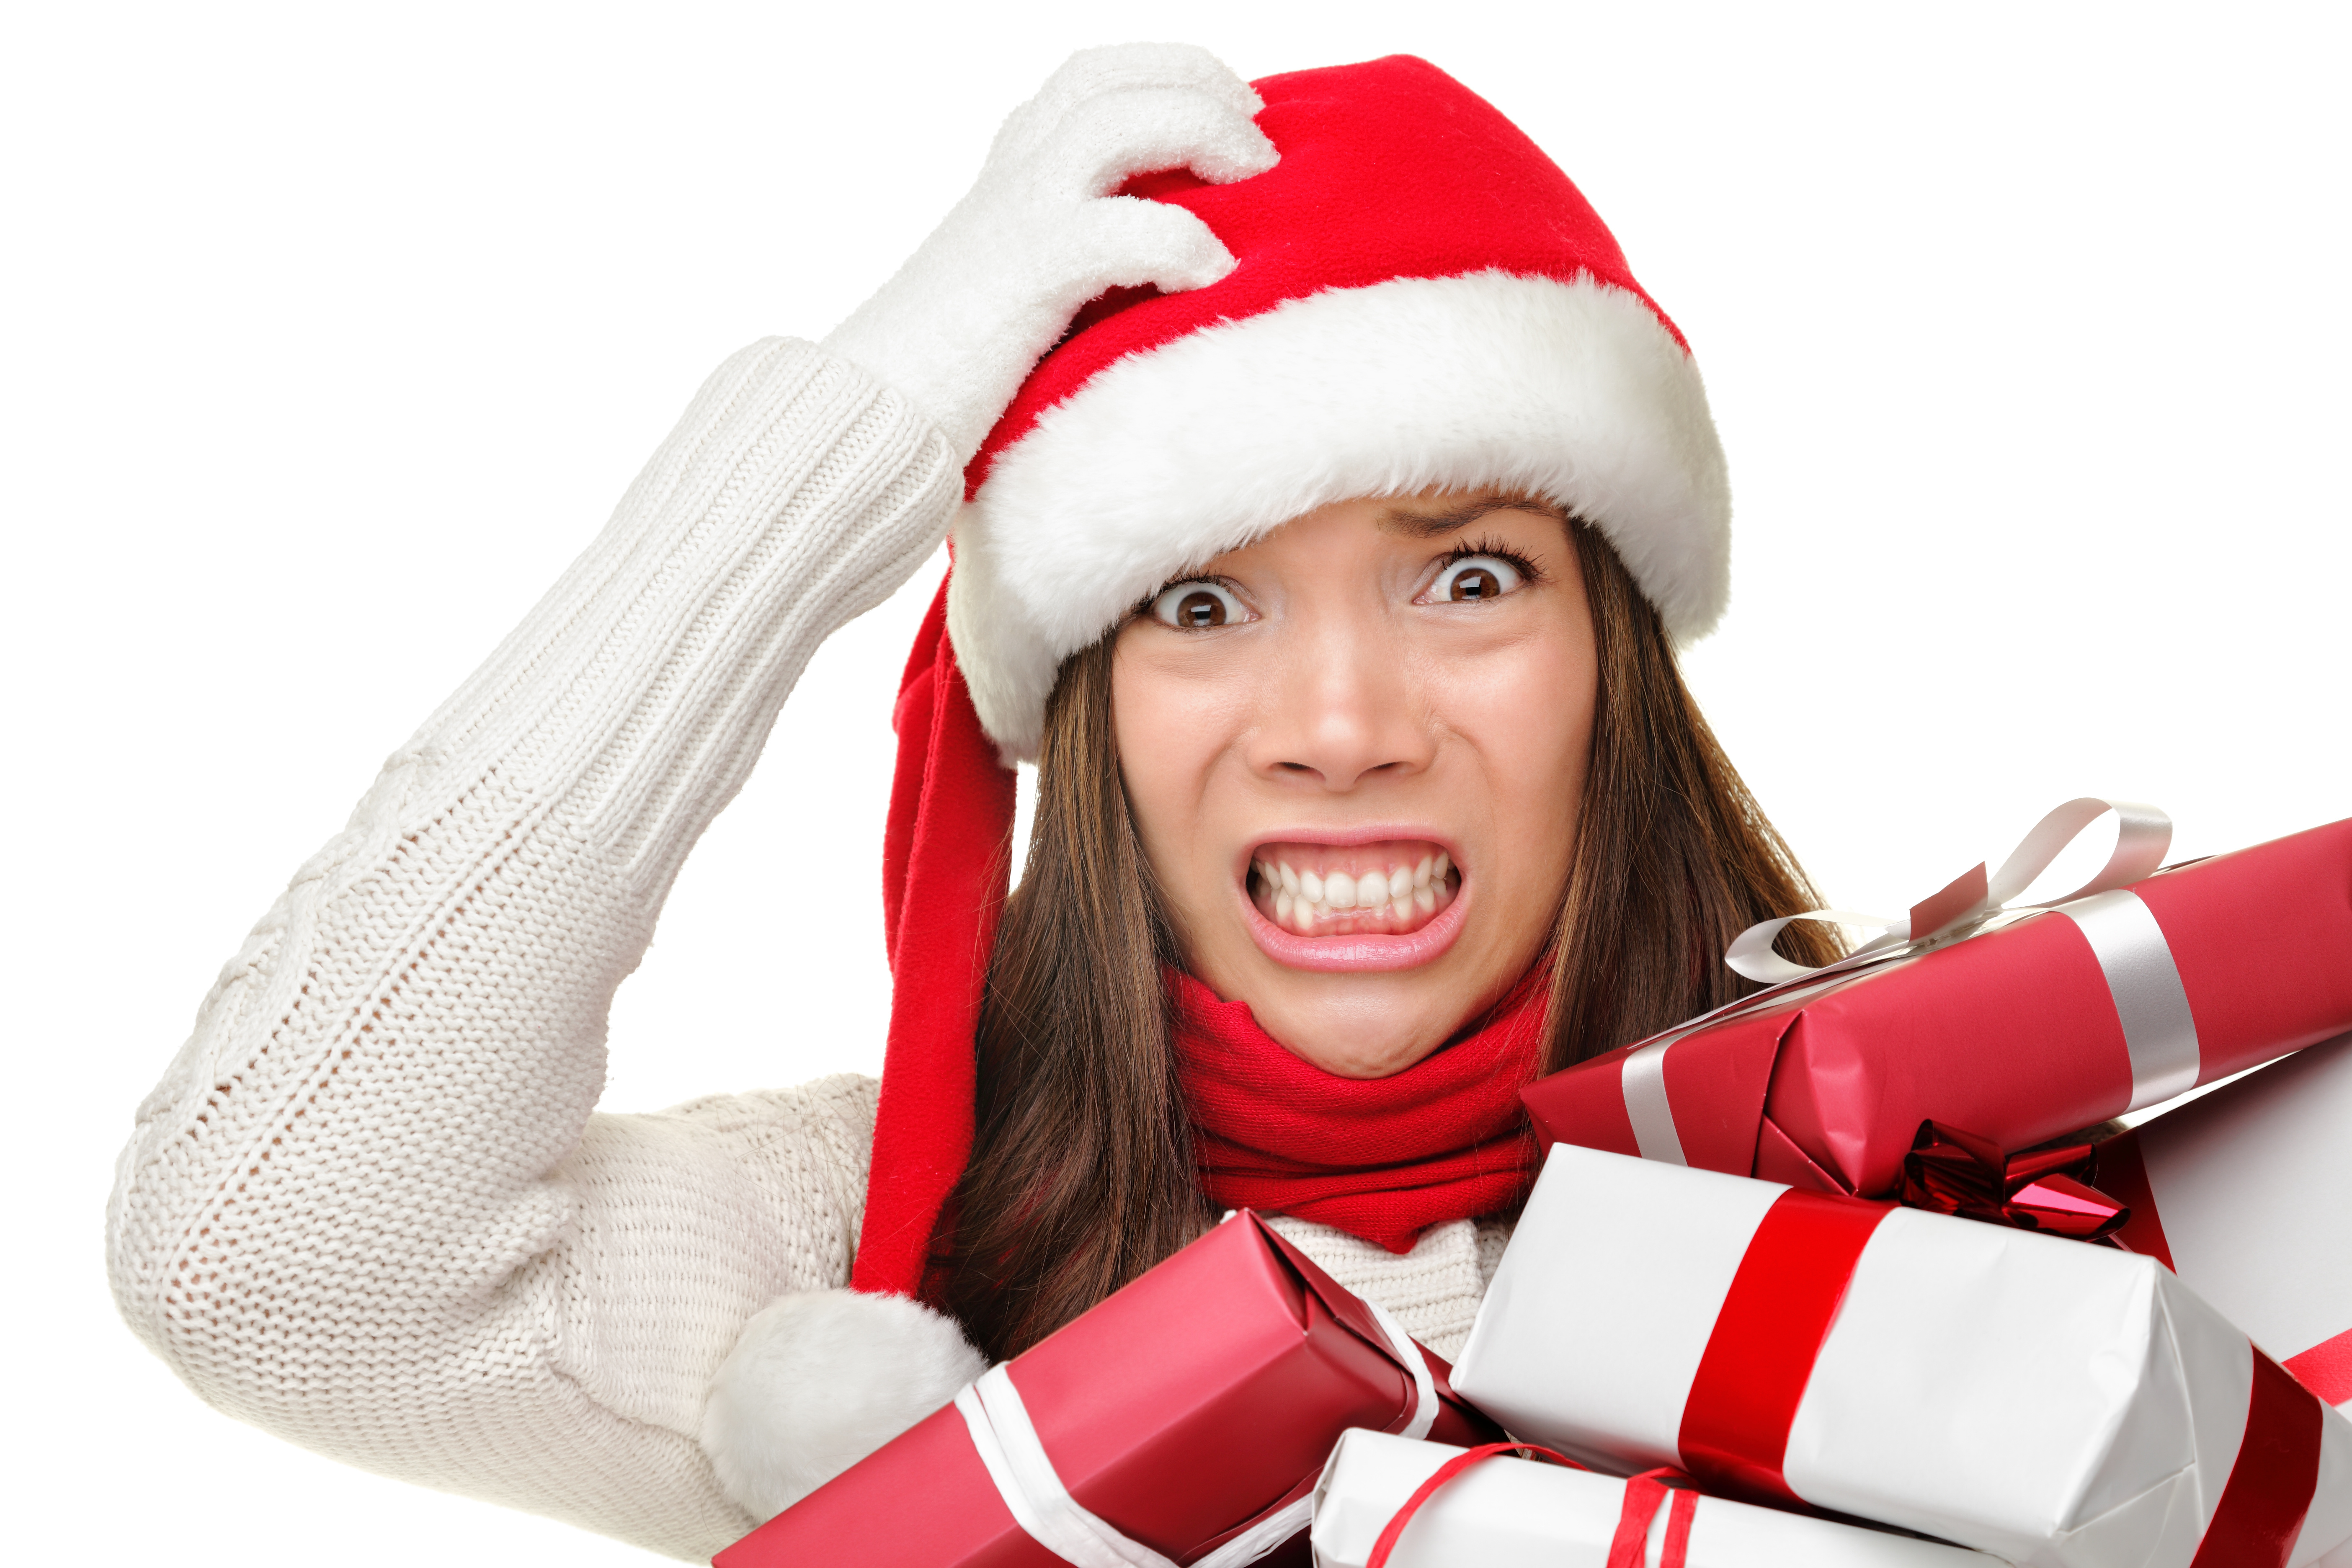 Managing Holiday Stress by Managing Your Daily Habits